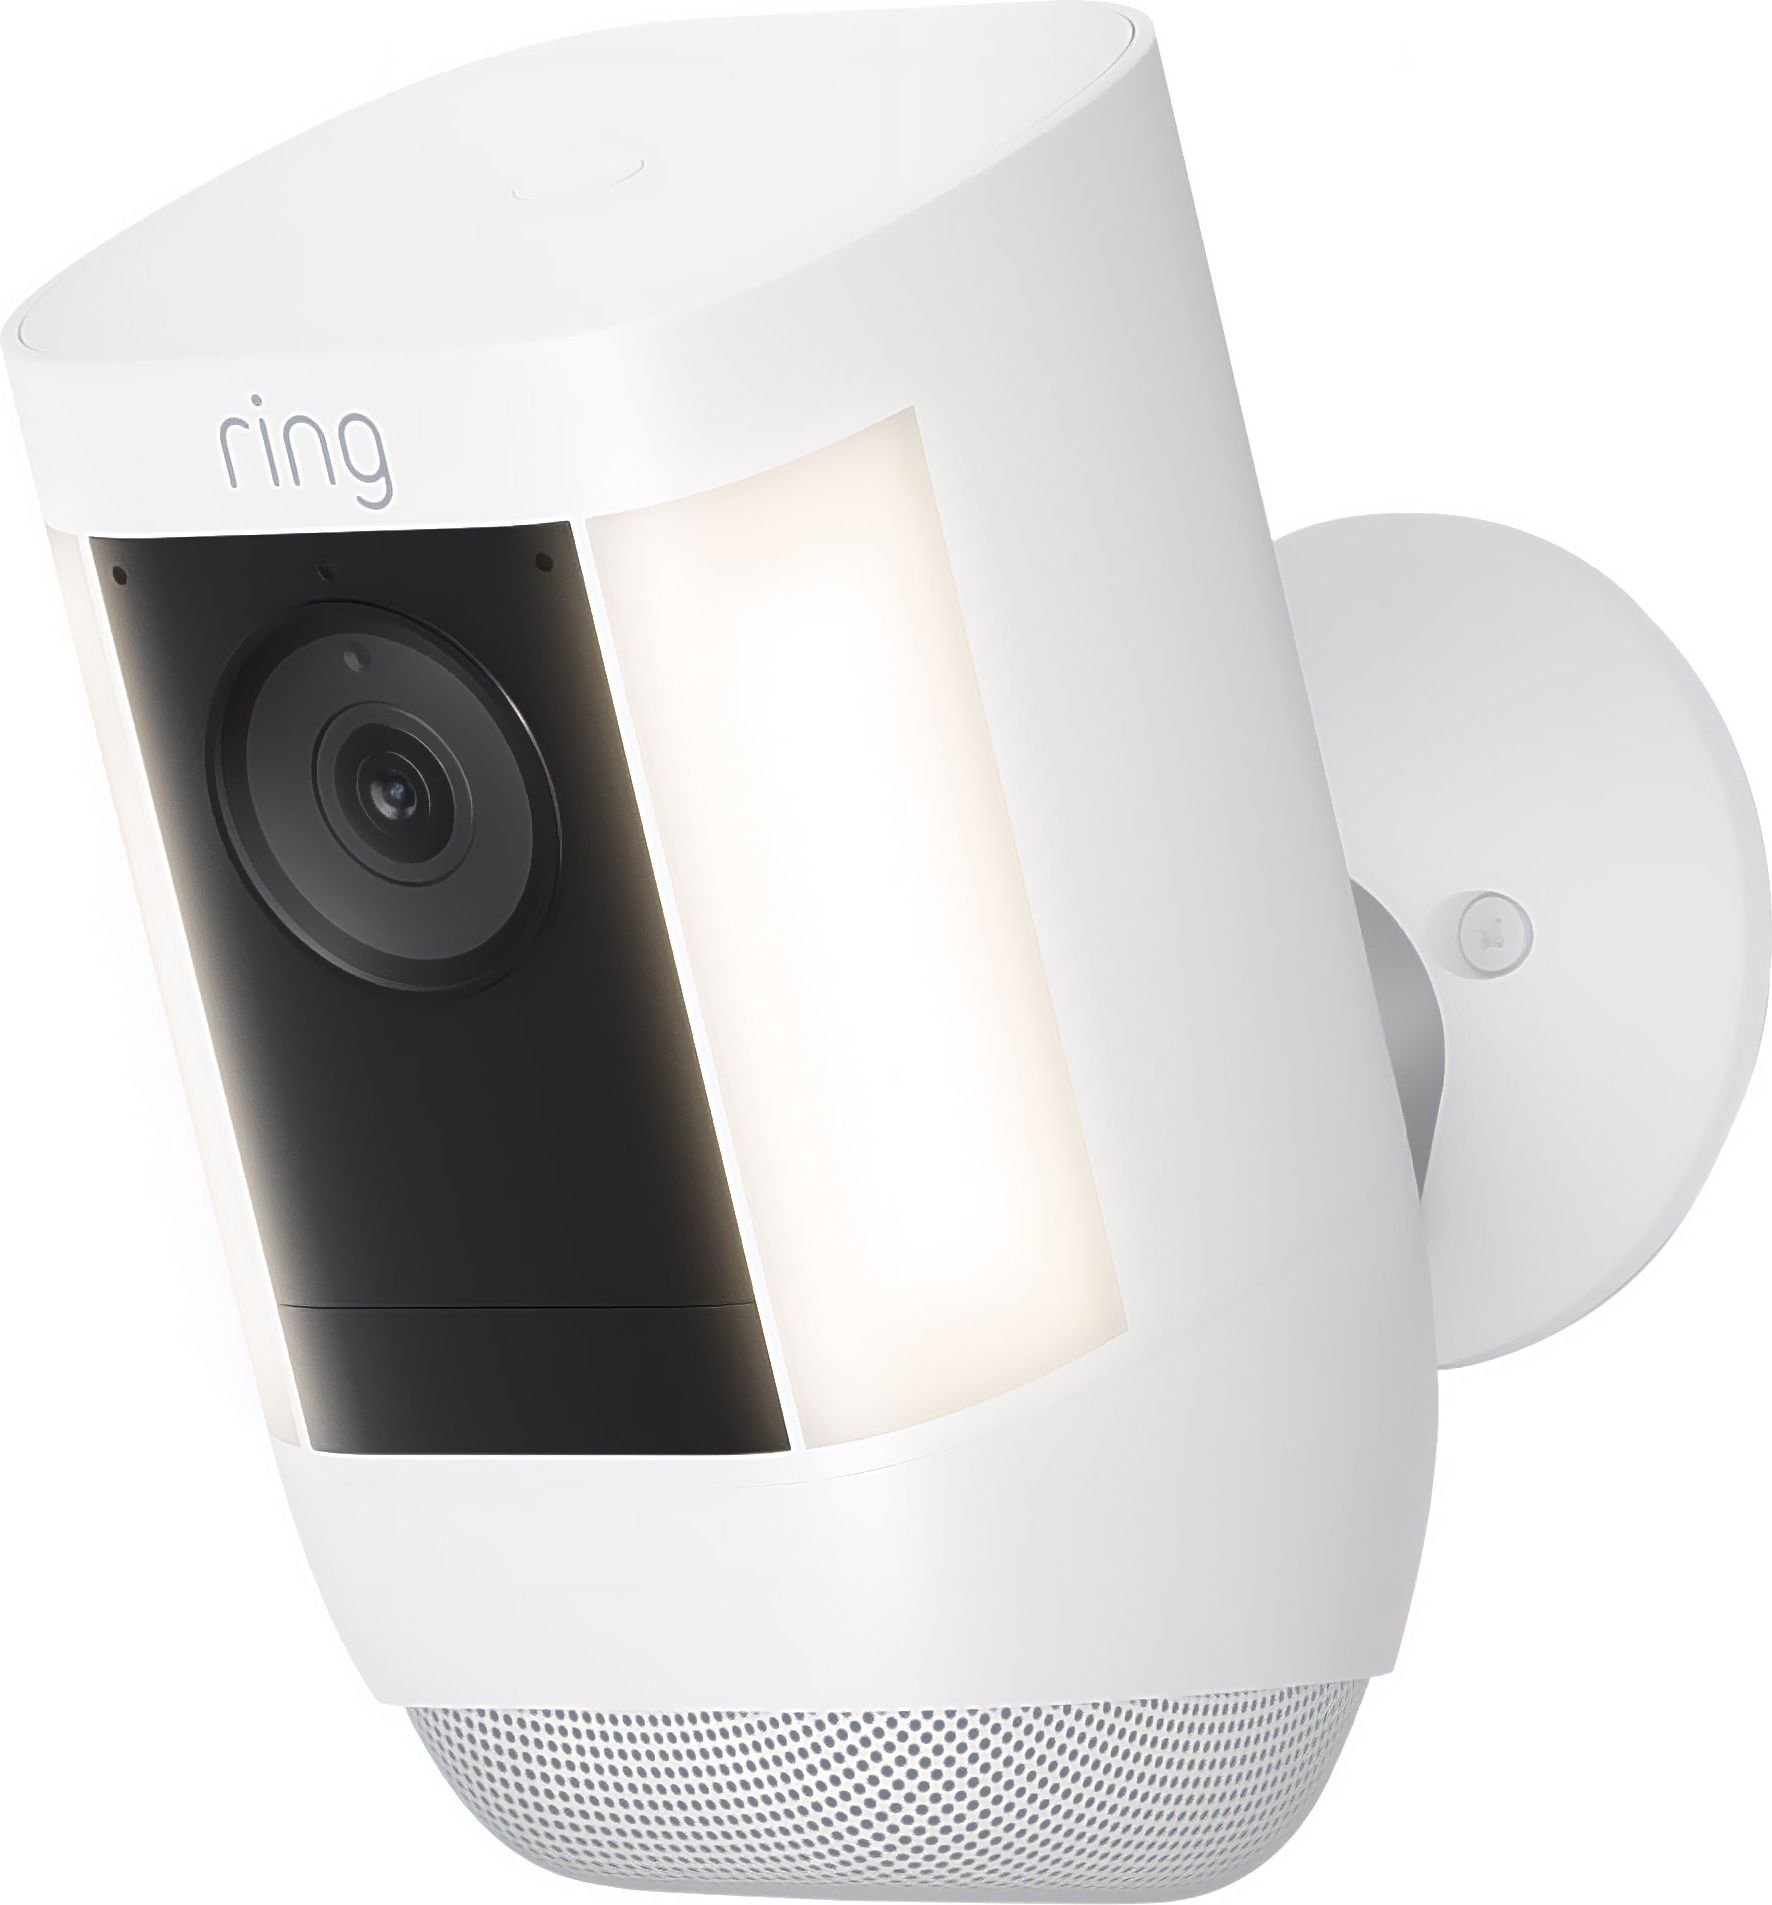 Ring Battery Powered Spotlight Cam Pro Full HD 1080p Smart Home Security Camera - White, White